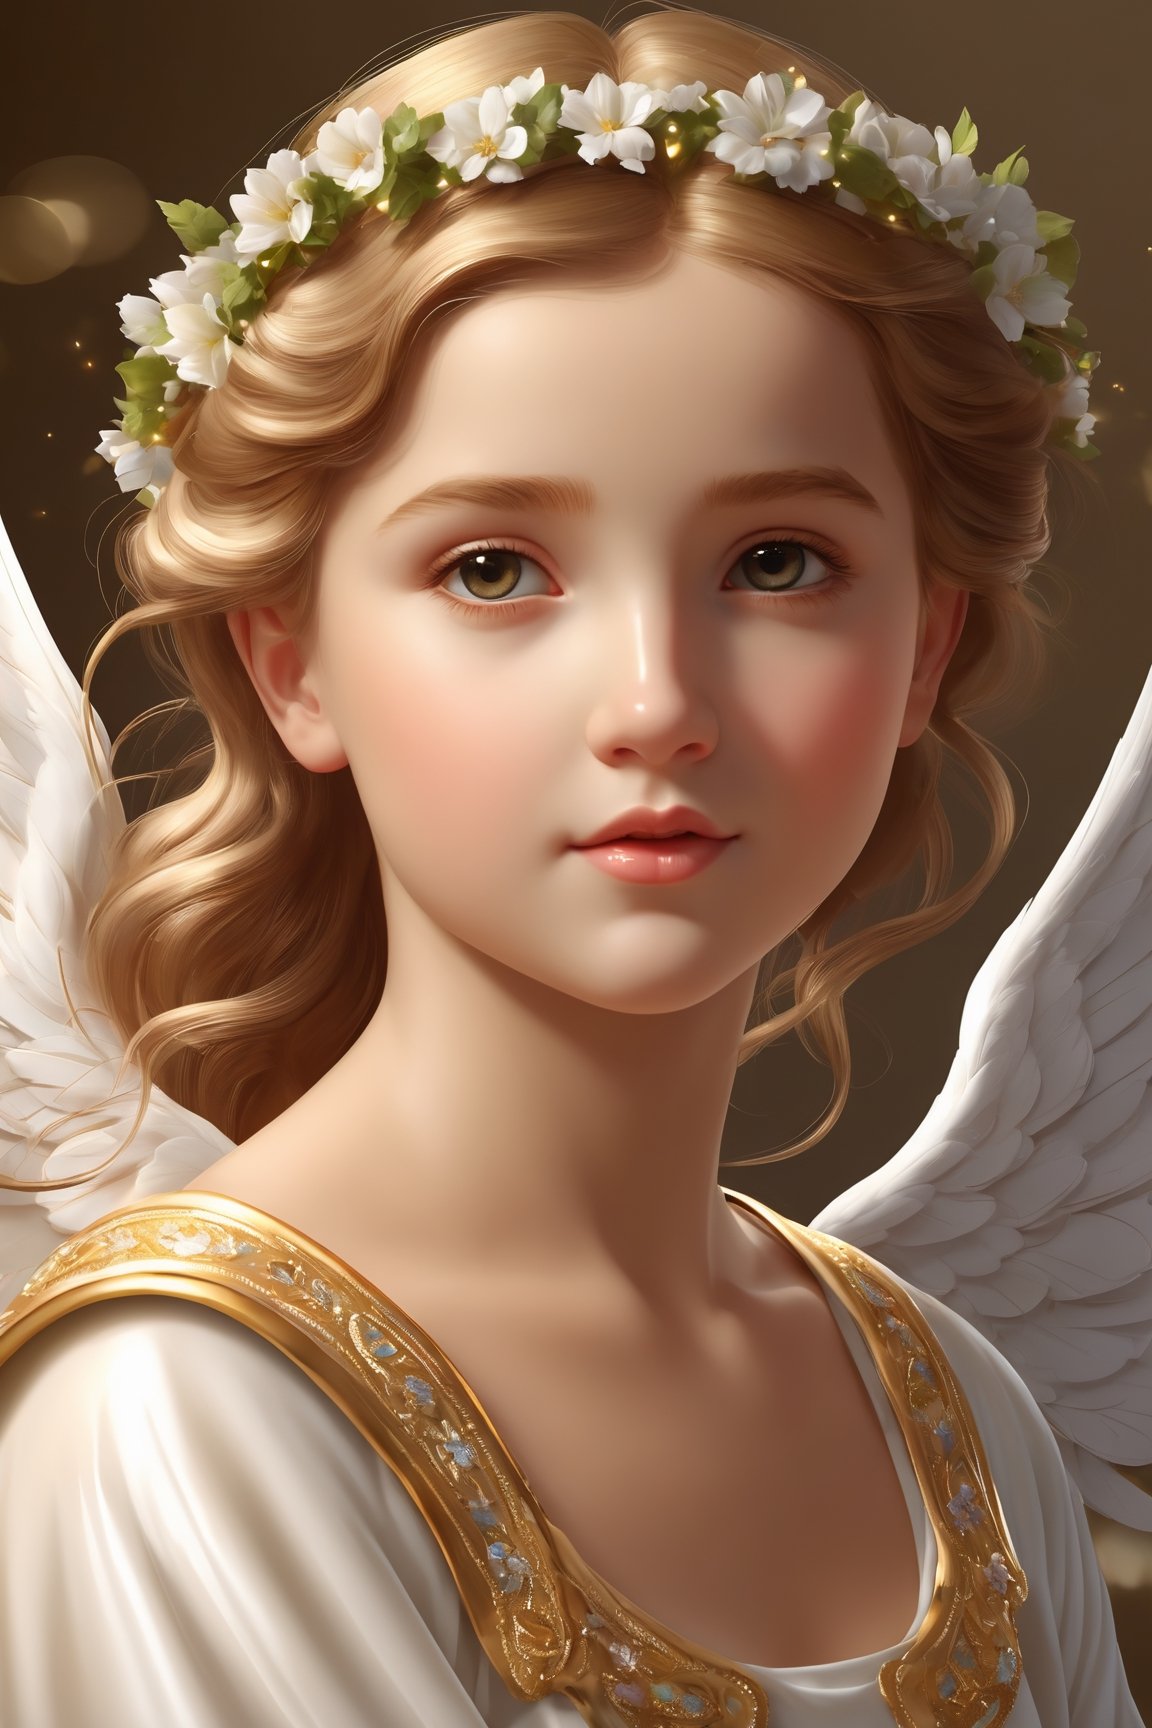 (Highest quality, 8K), Craft a breathtaking masterpiece of a Beautiful Angel in a fantastic and realistic vector art style. Focus on portraying a cute face and cute hips with meticulous attention to detail. Render this artwork in an animation-style illustration that captures the essence of divine beauty and charm.